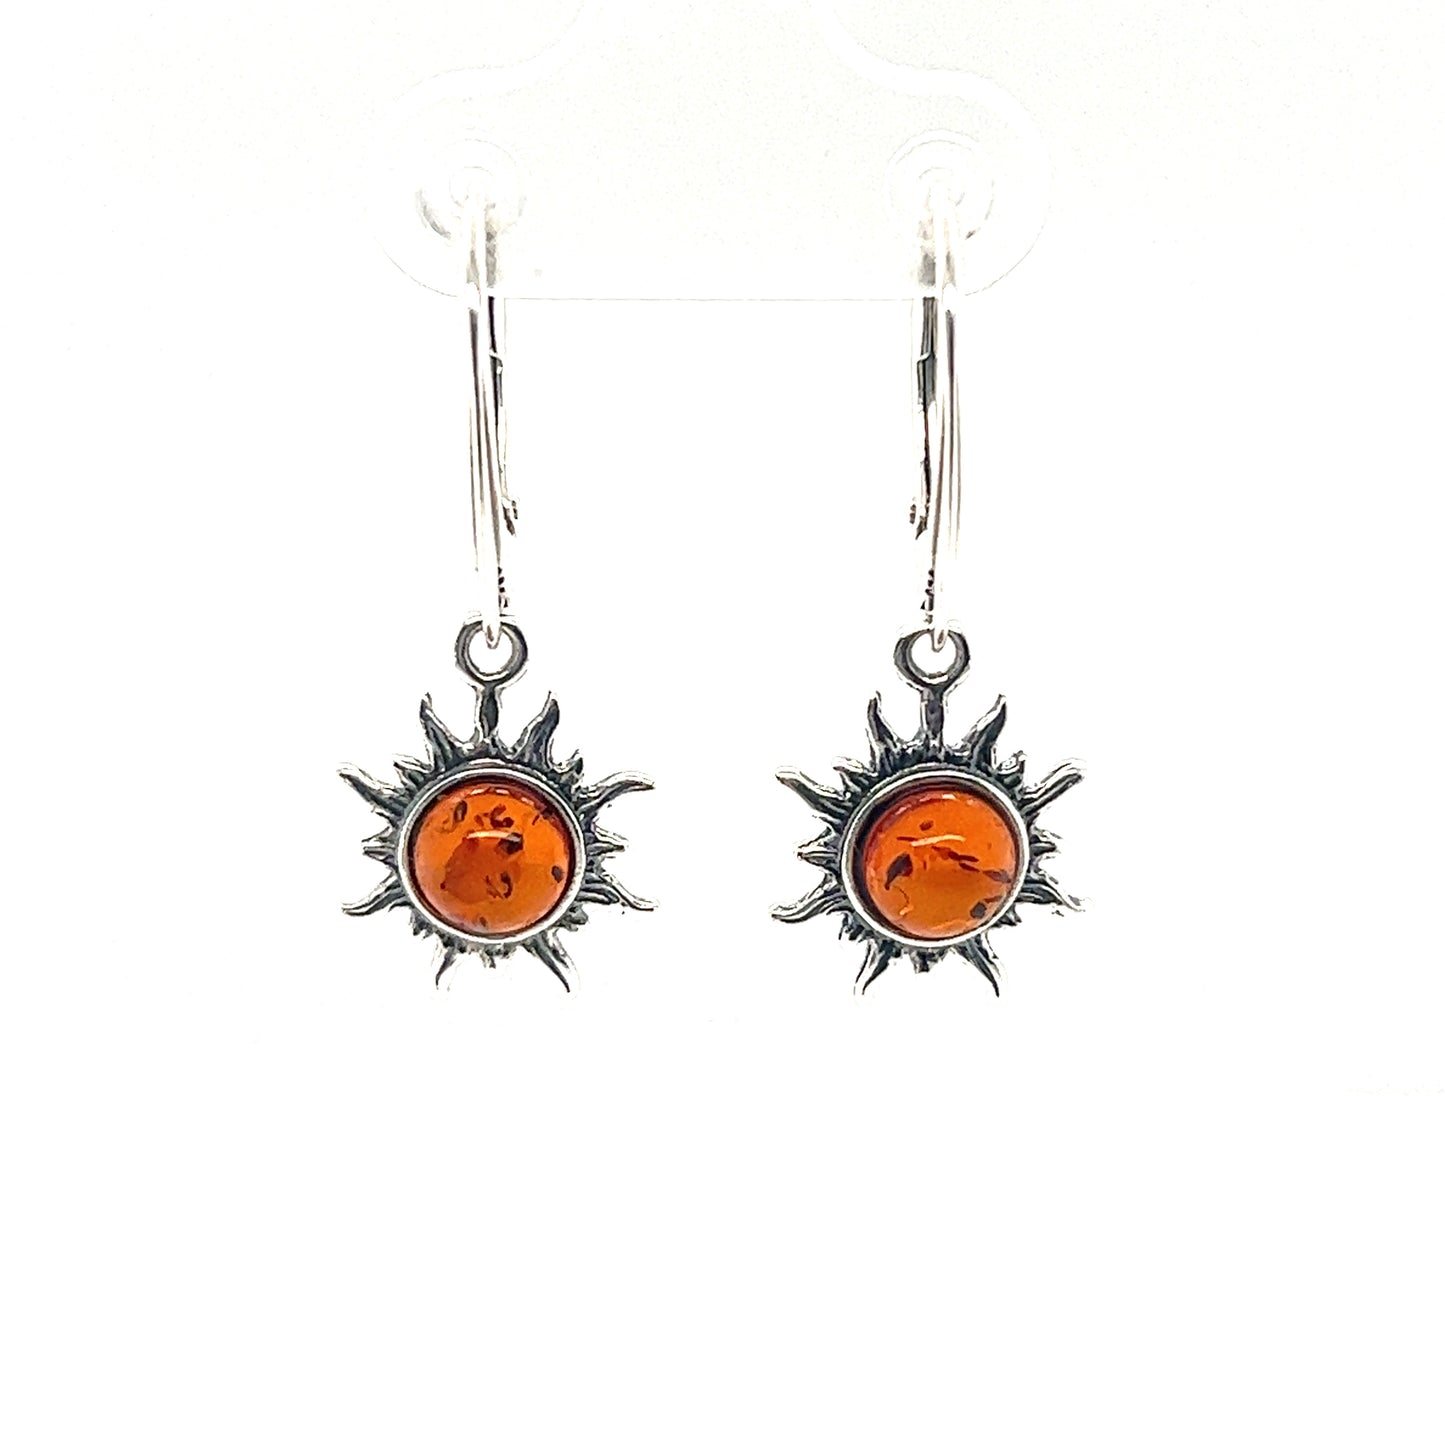 A pair of Brilliant Baltic Amber Sun Earrings featuring a Baltic amber sun, by Super Silver.